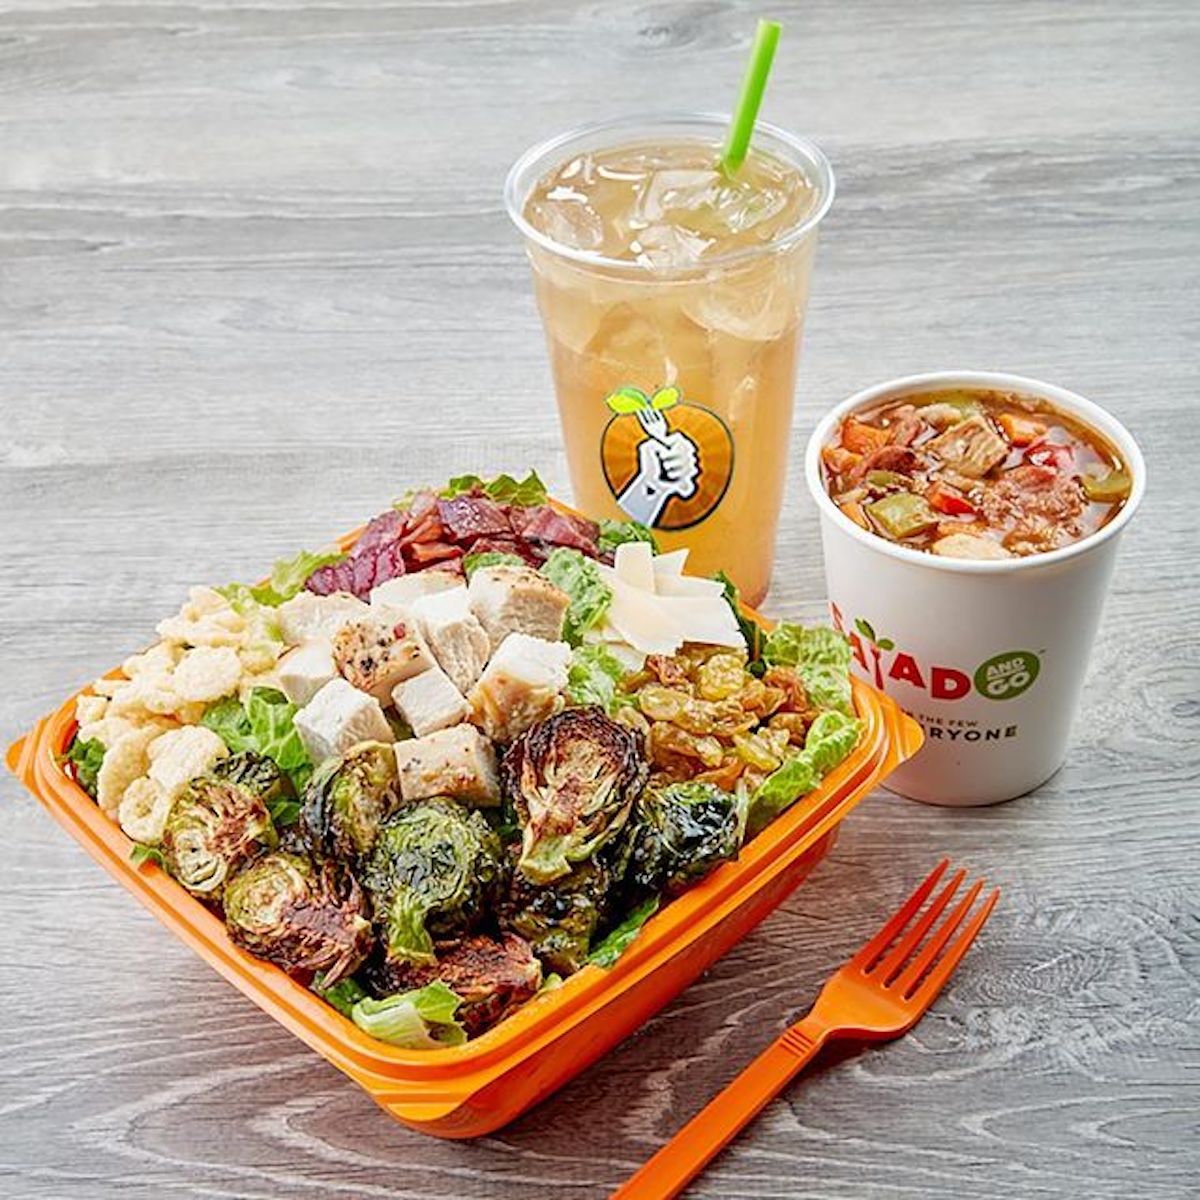 Salad and Go Looks to Be Making Another Healthy Move in Sin City